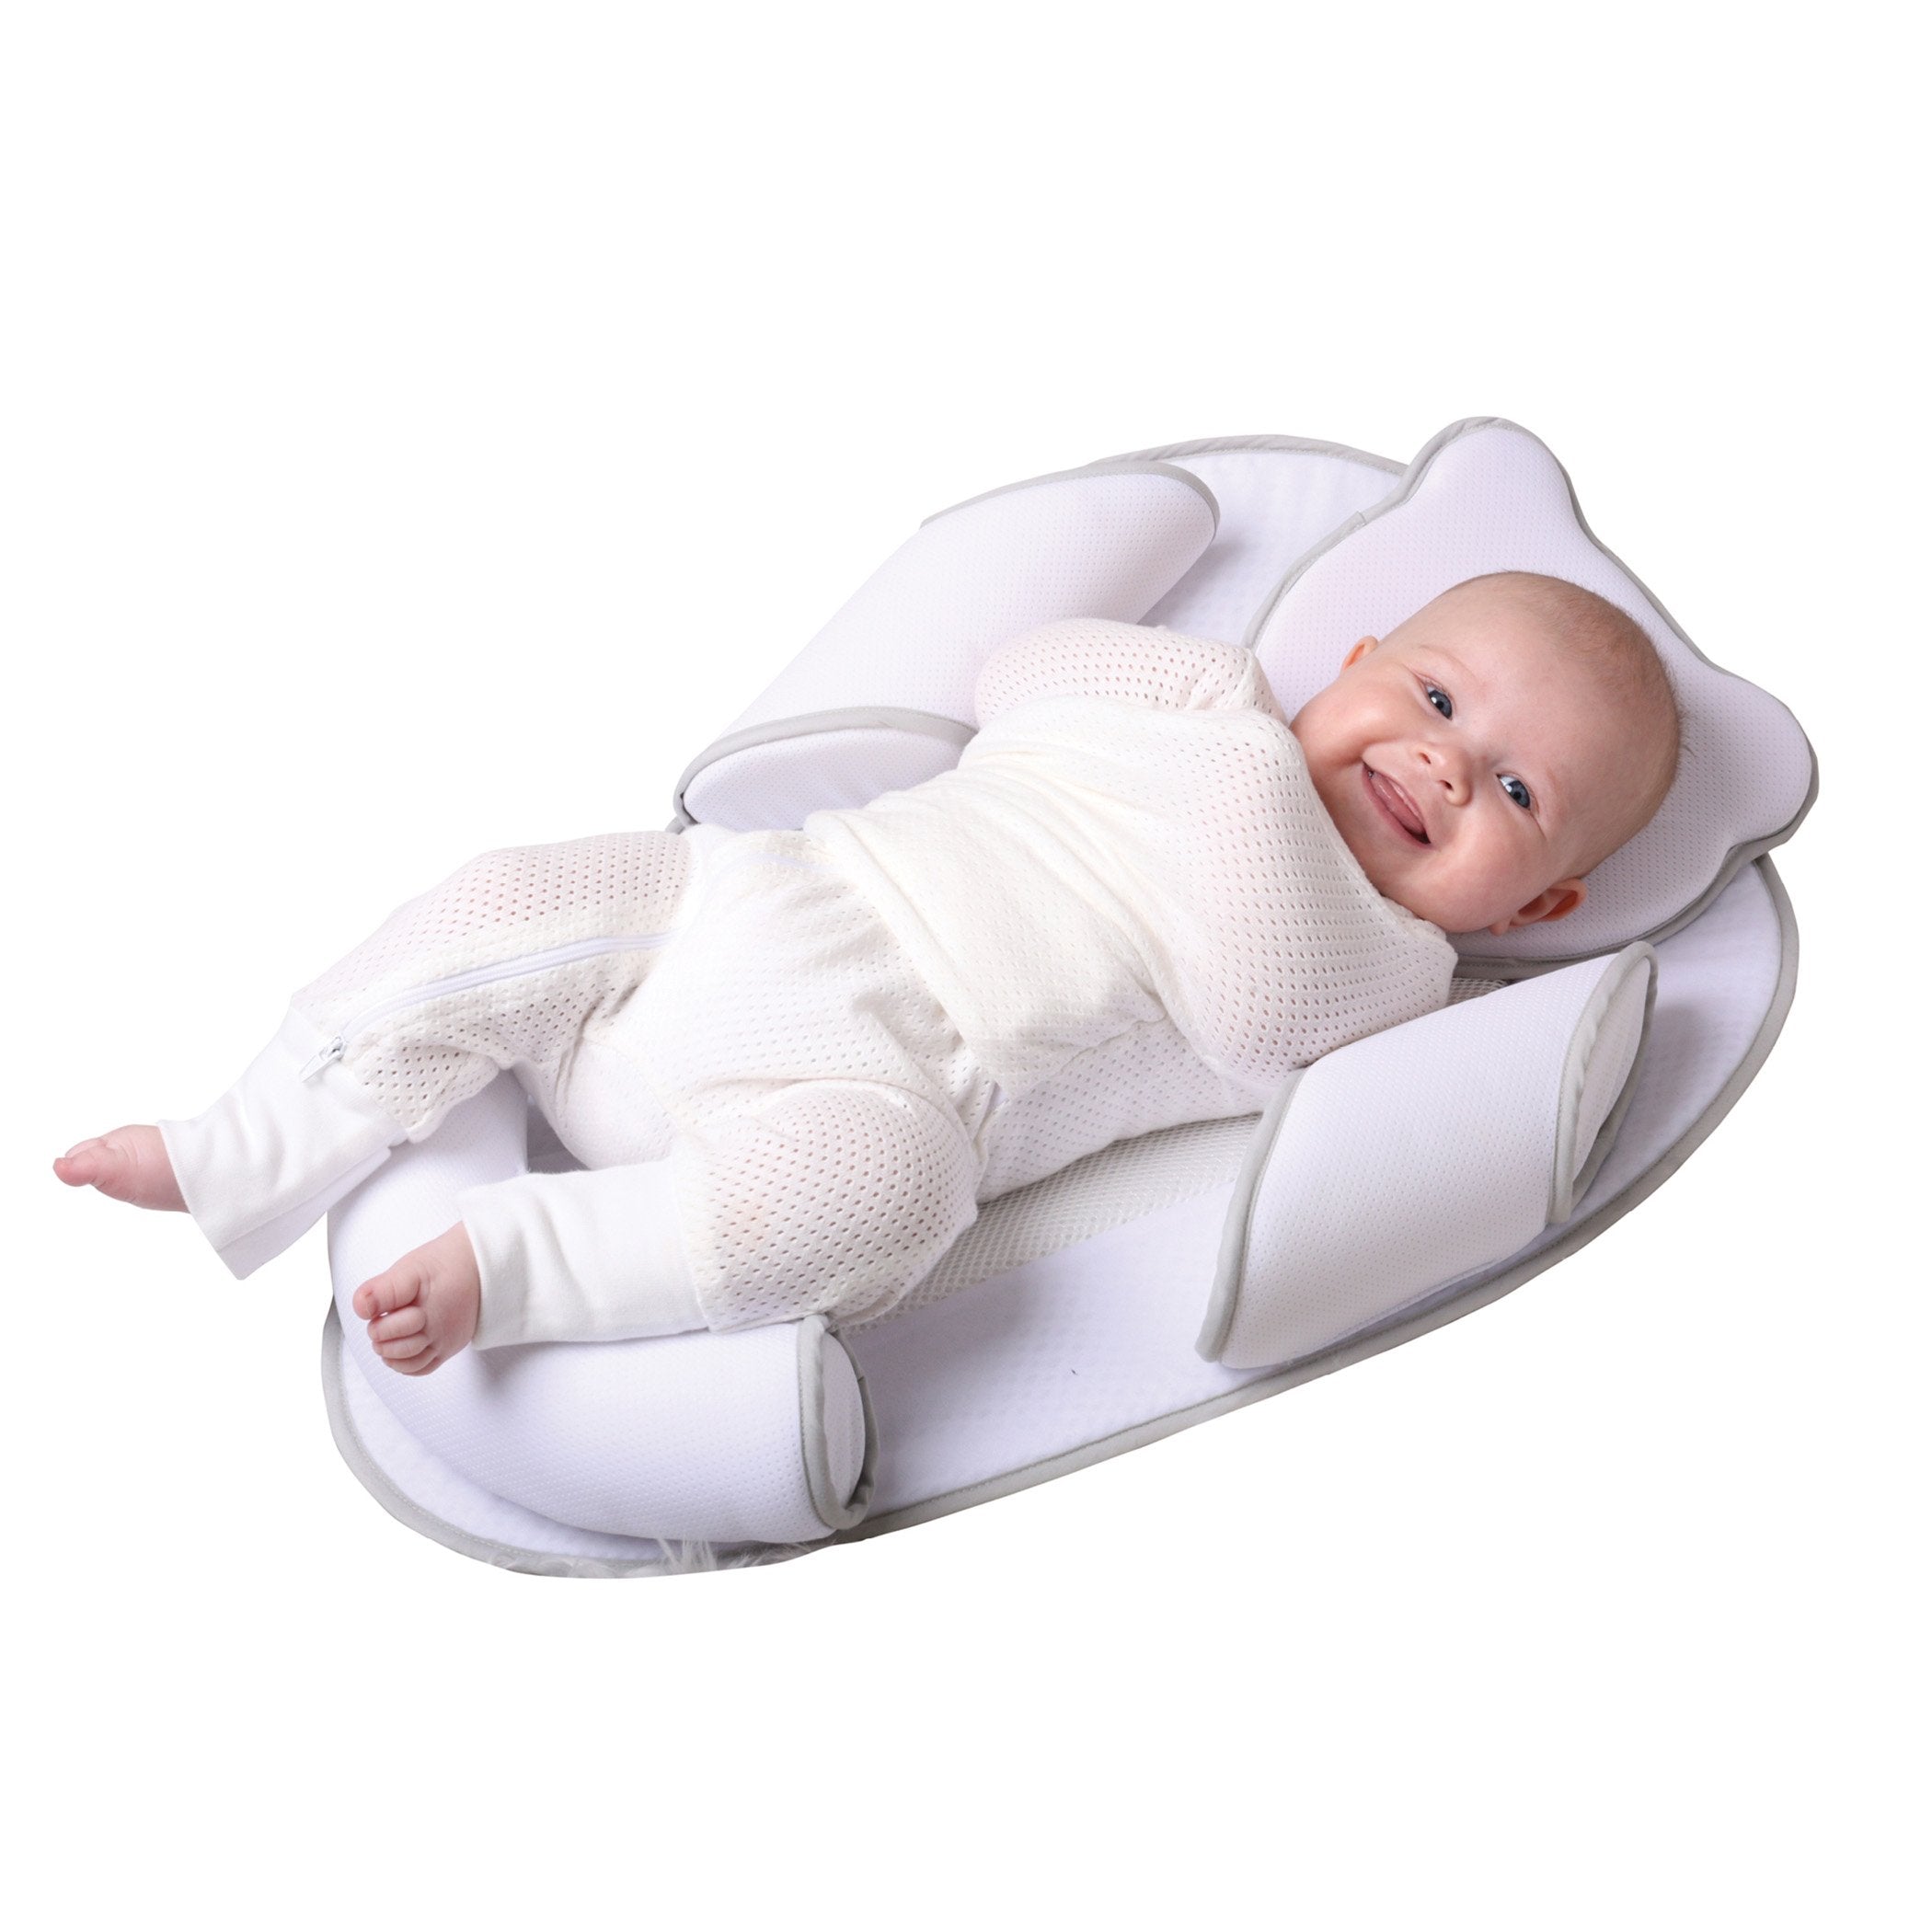 Air+ Infant Sleep Positioner with Head Rest